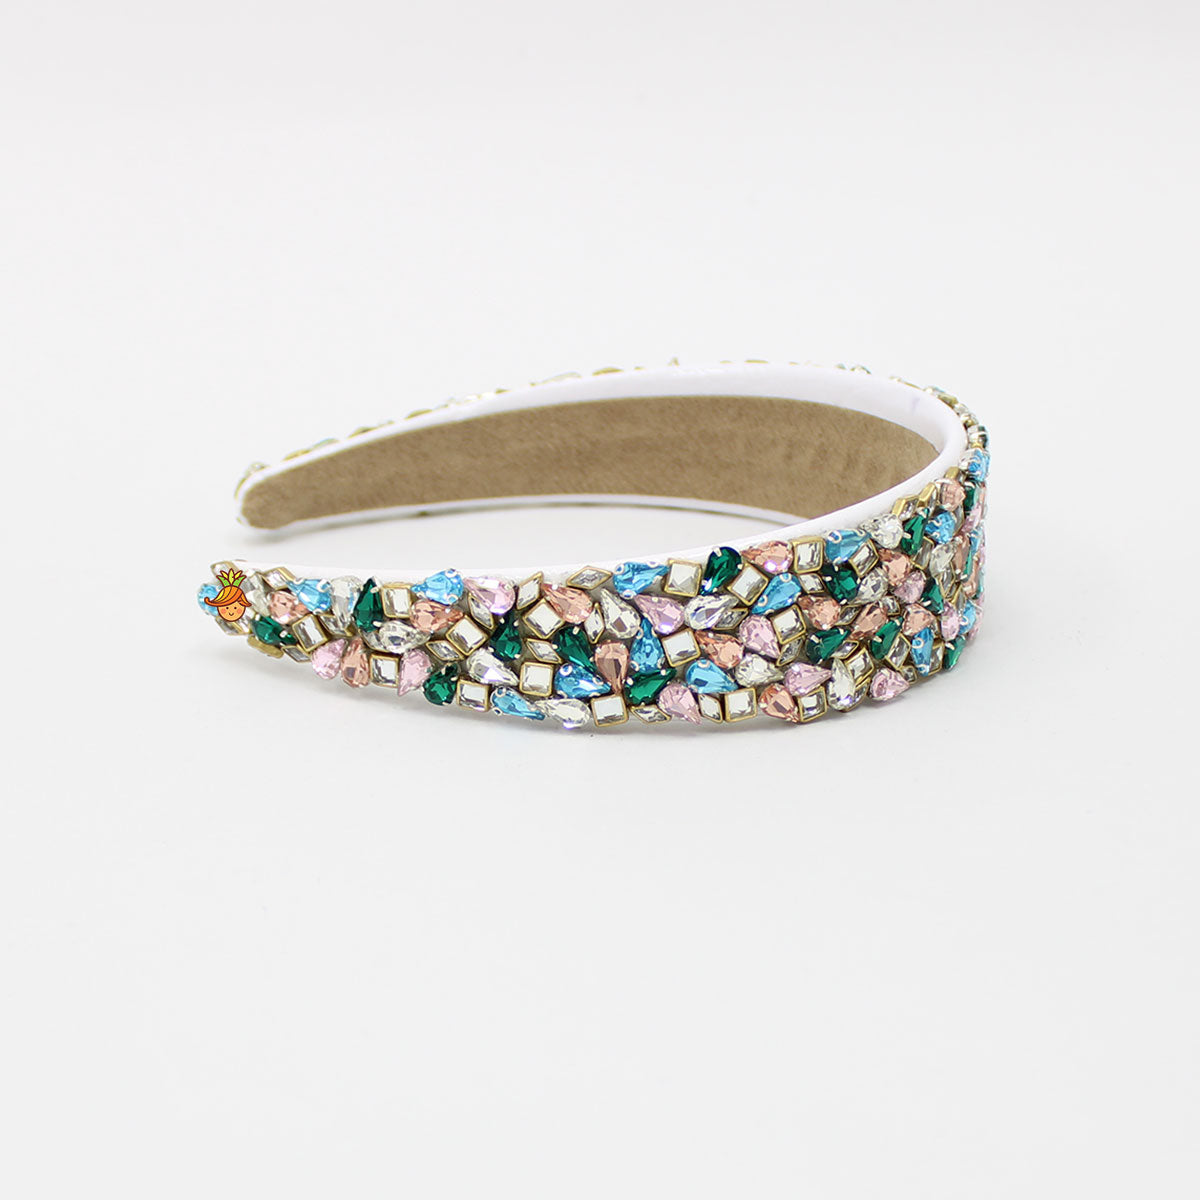 Multicolour Faux Gemstones Studded White Hair Band